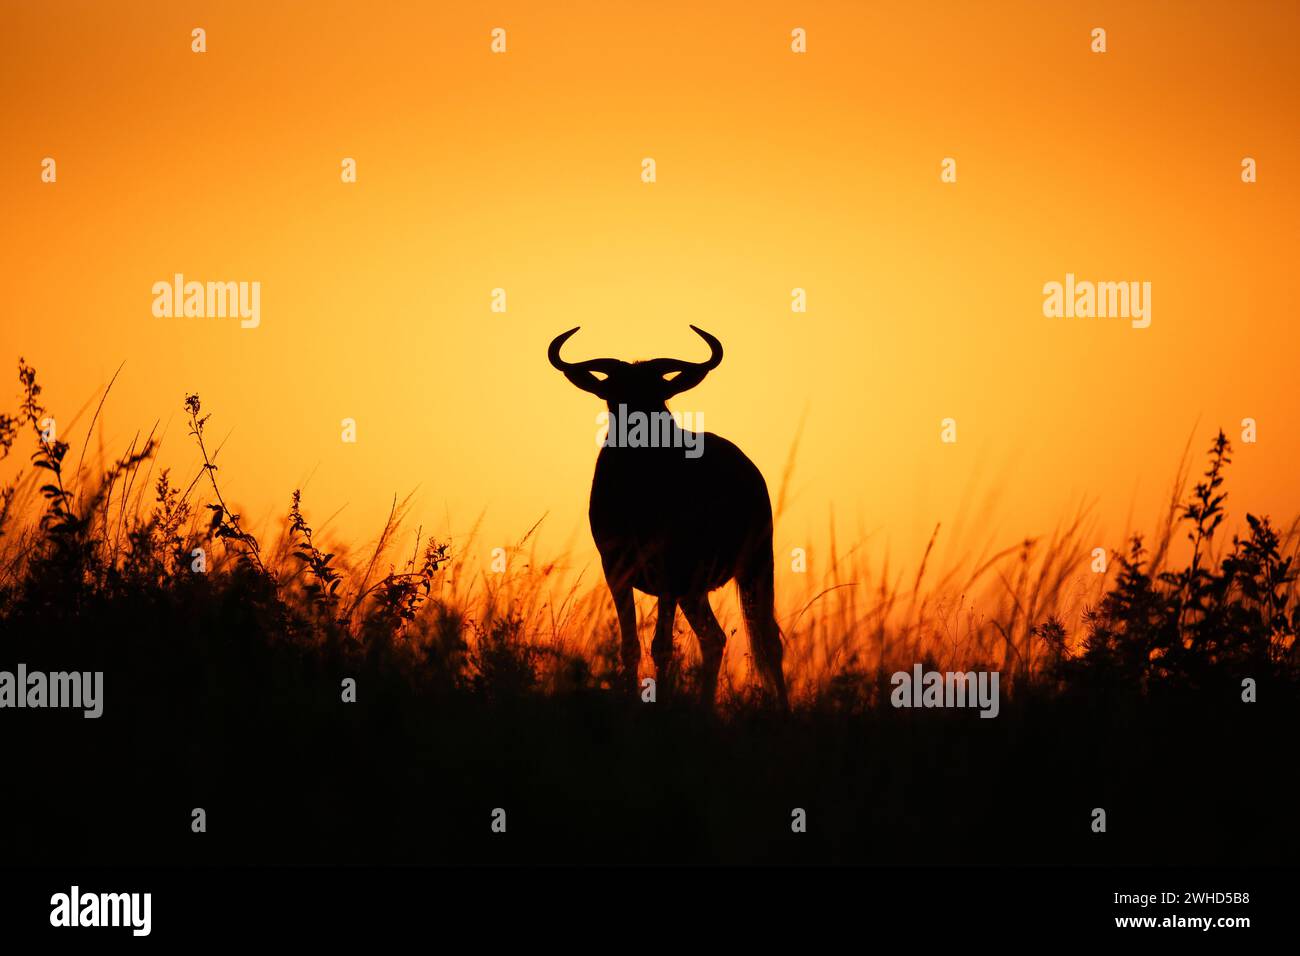 Africa, Blue Wildebeest (Connochaetes taurinus), dawn, South Africa, bush, copy space, daytime, nature, nature reserve, no people, outdoors, safari, tourism, wildlife, abstract, orange background, animals in the wild, Gauteng Province, silhouette Stock Photo